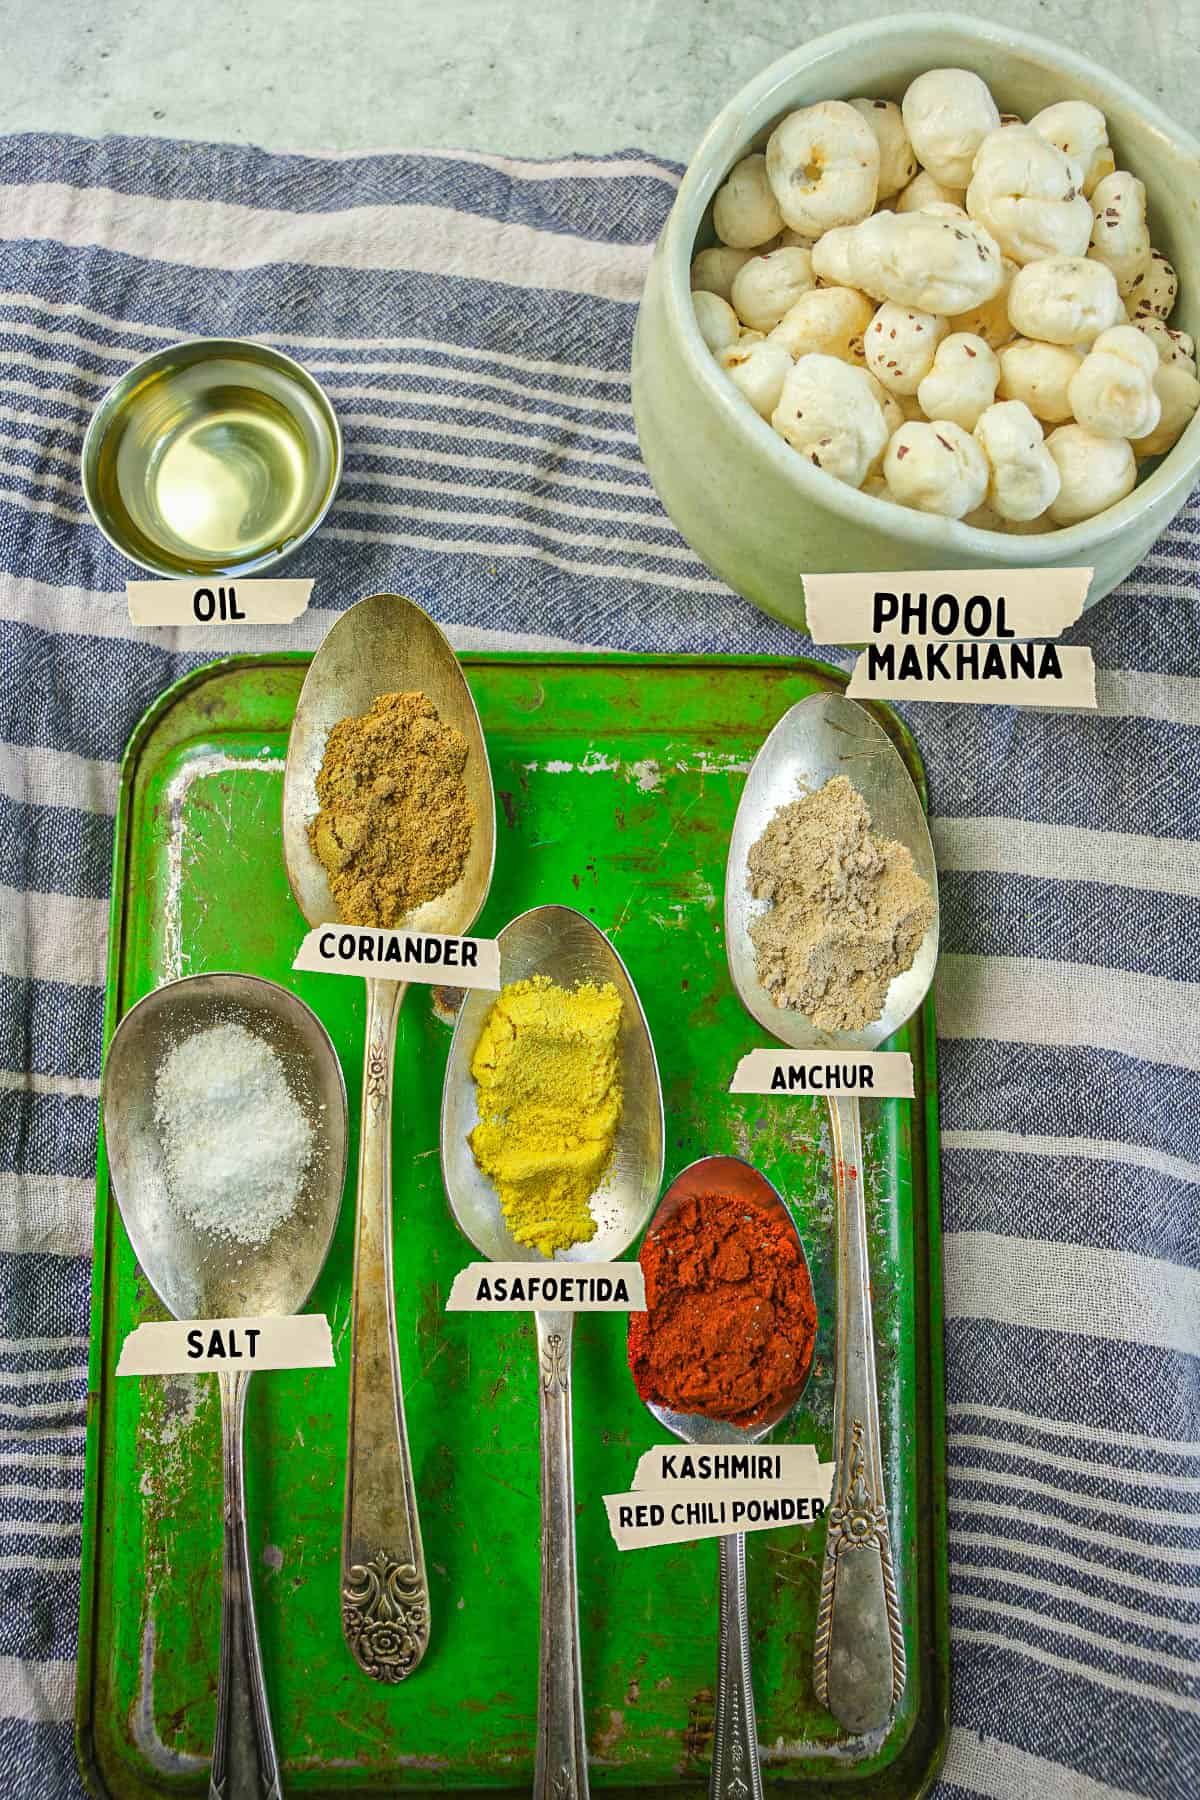 A green tray with the ingredients for phool makhana measured out and labeled on it.